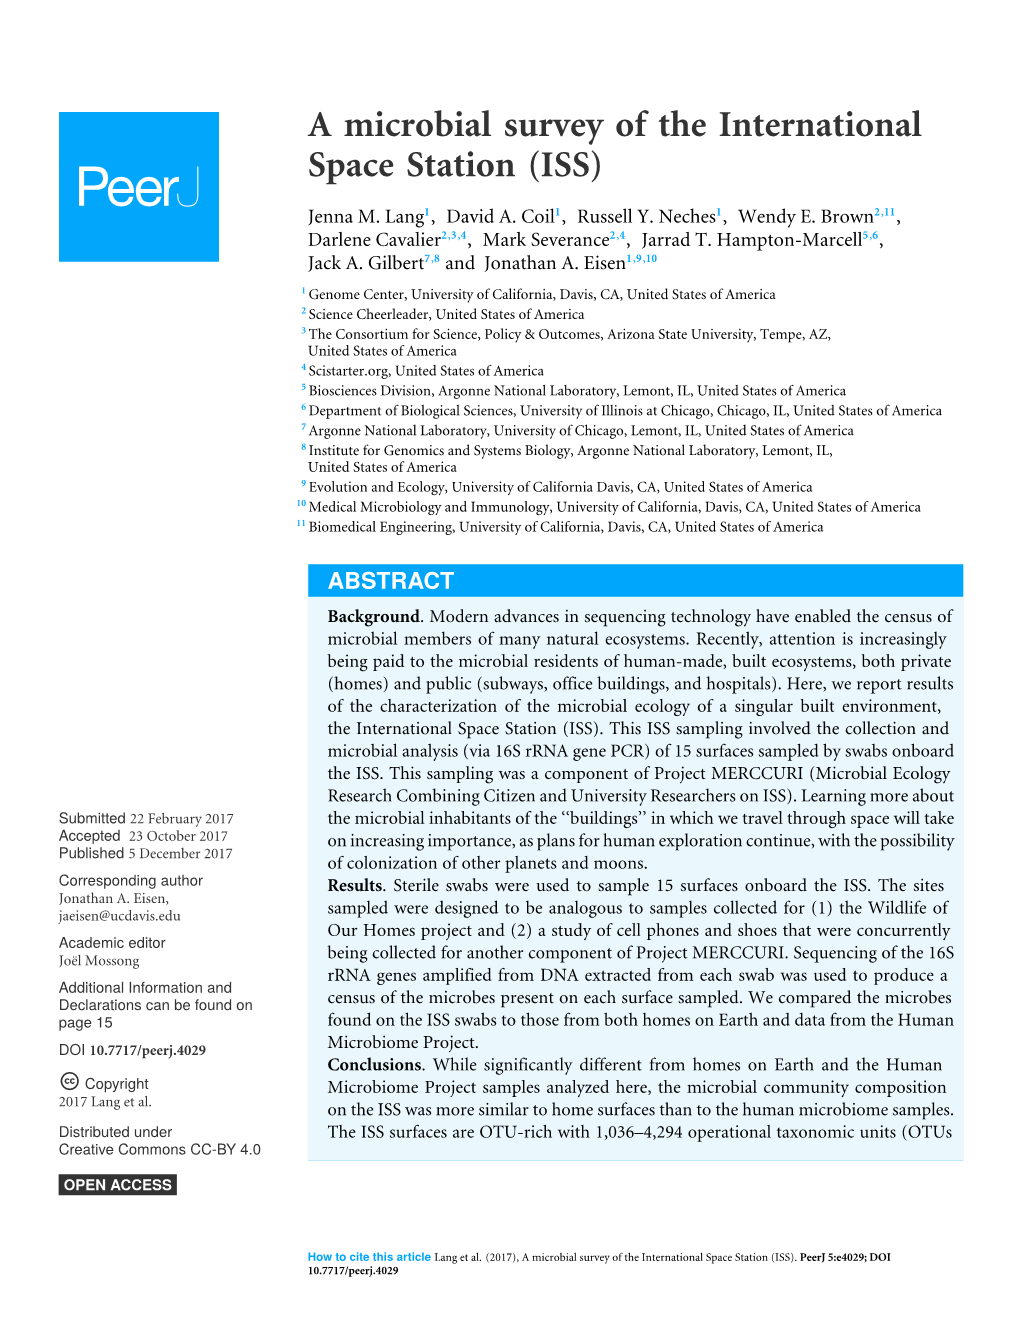 A Microbial Survey of the International Space Station (ISS)